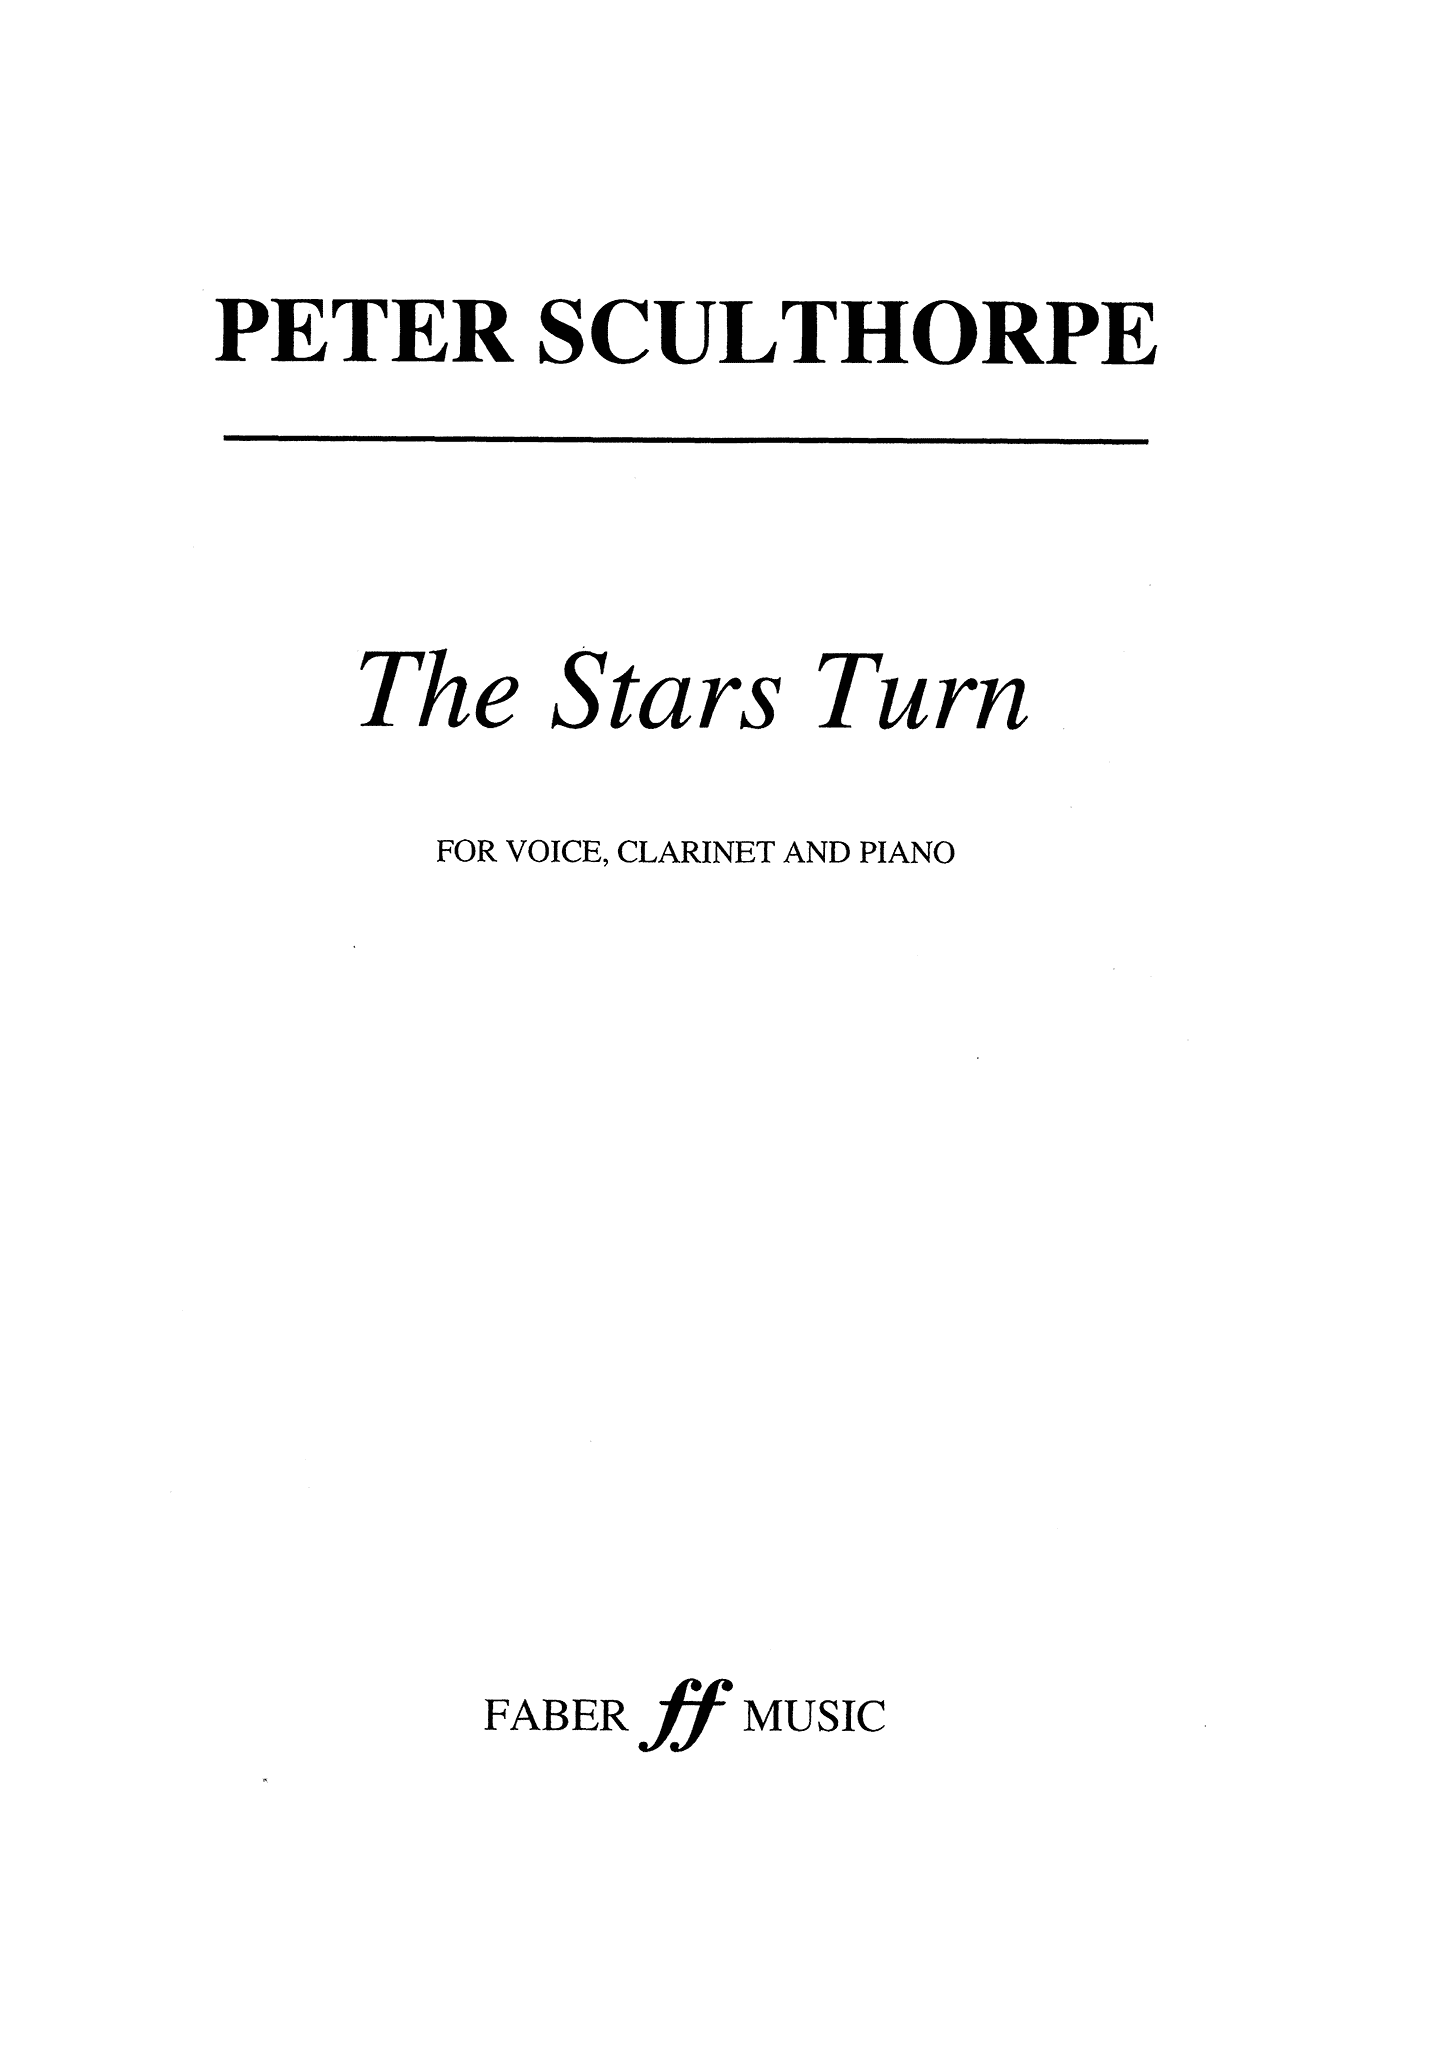 Sculthorpe The Stars Turn voice clarinet piano arrangement cover